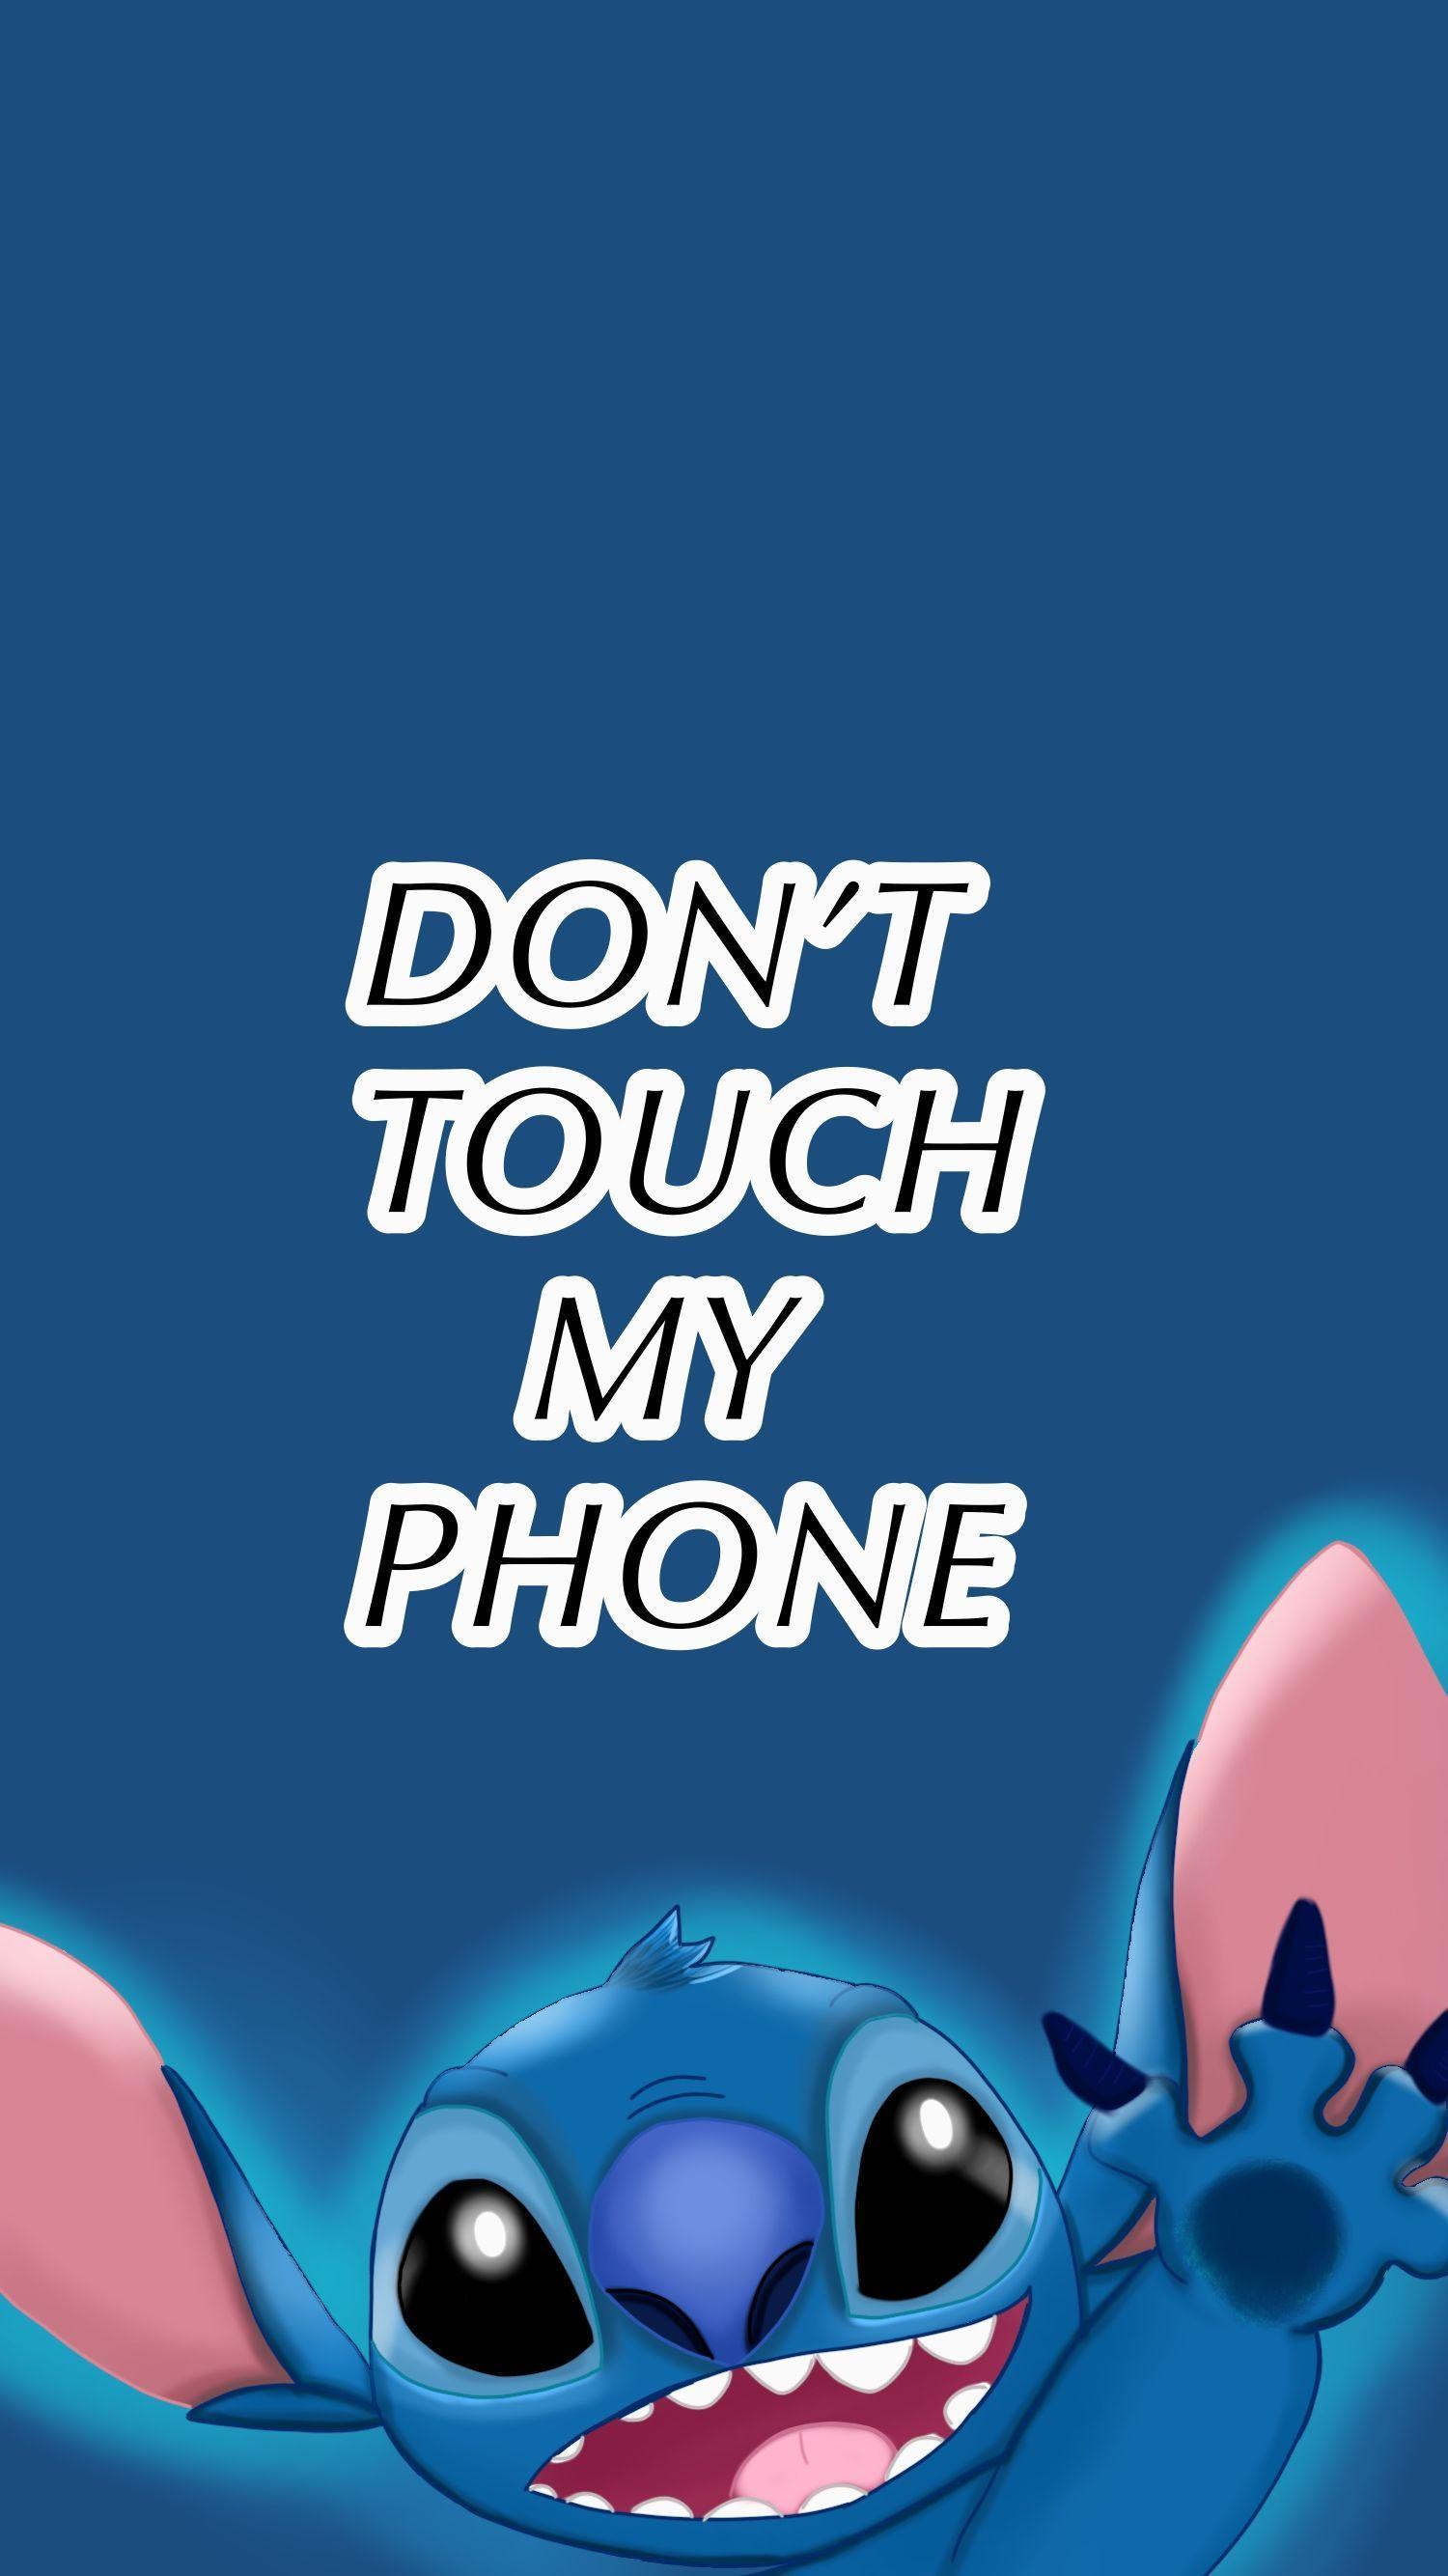 Don T Touch My Phone Stitch Wallpapers Top Free Don T Touch My Phone Stitch Backgrounds Wallpaperaccess We present you our collection of desktop wallpaper theme: don t touch my phone stitch wallpapers